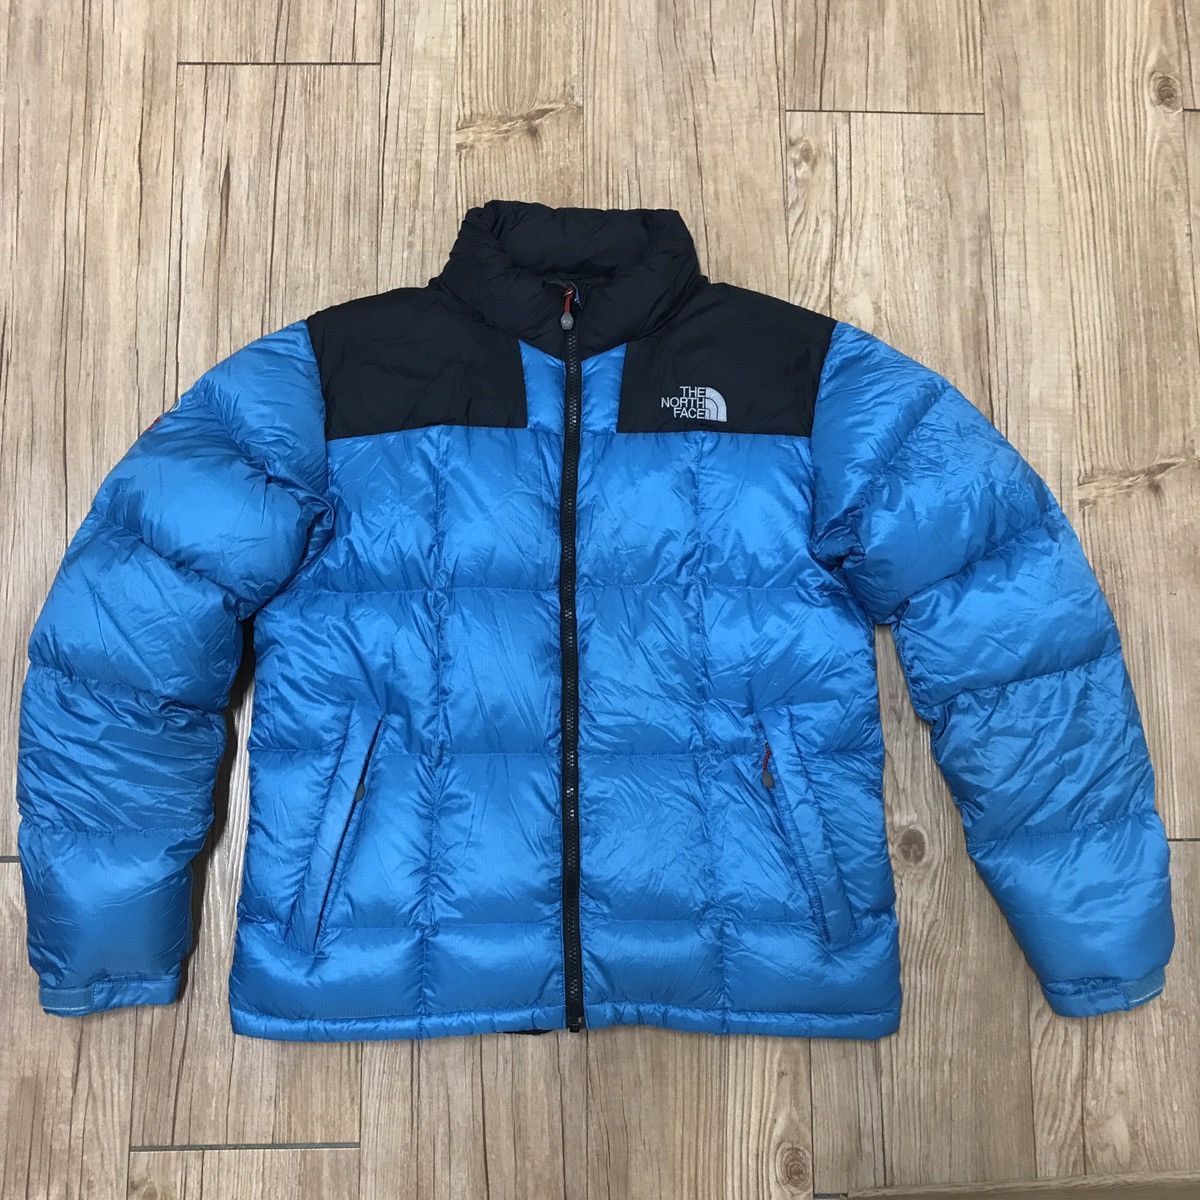 The North Face The North Face nuptse 800 puffer jacket | Grailed